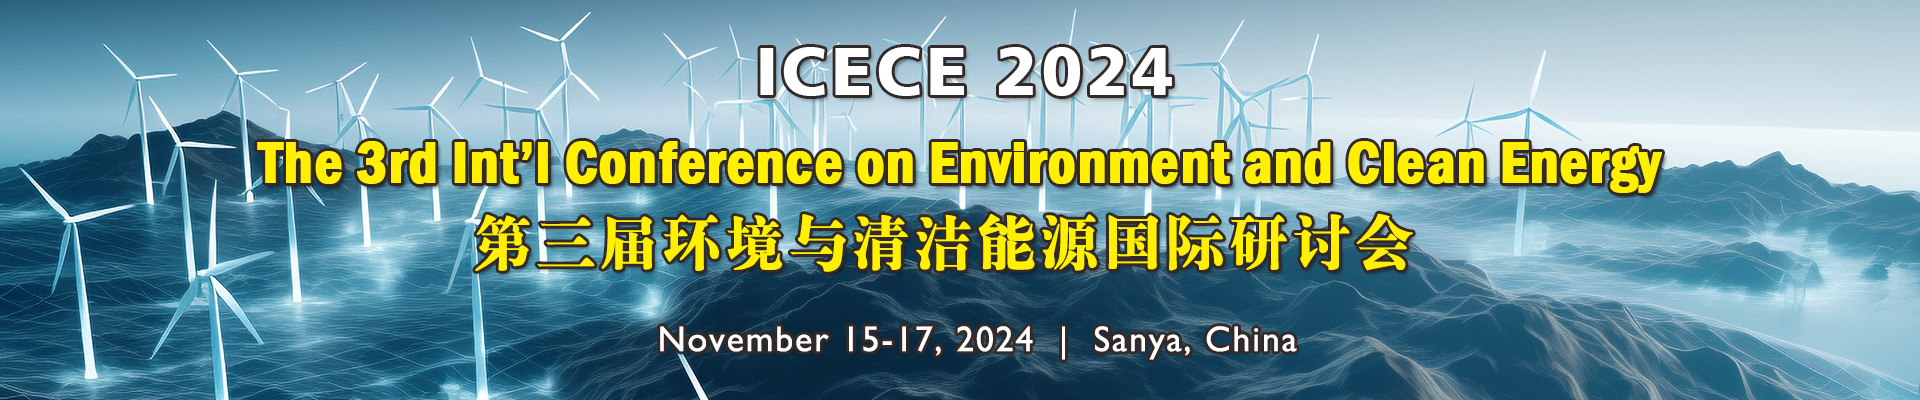 The 3rd Int’l Conference on Environment and Clean Energy (ICECE 2024), Sanya, Hainan, China